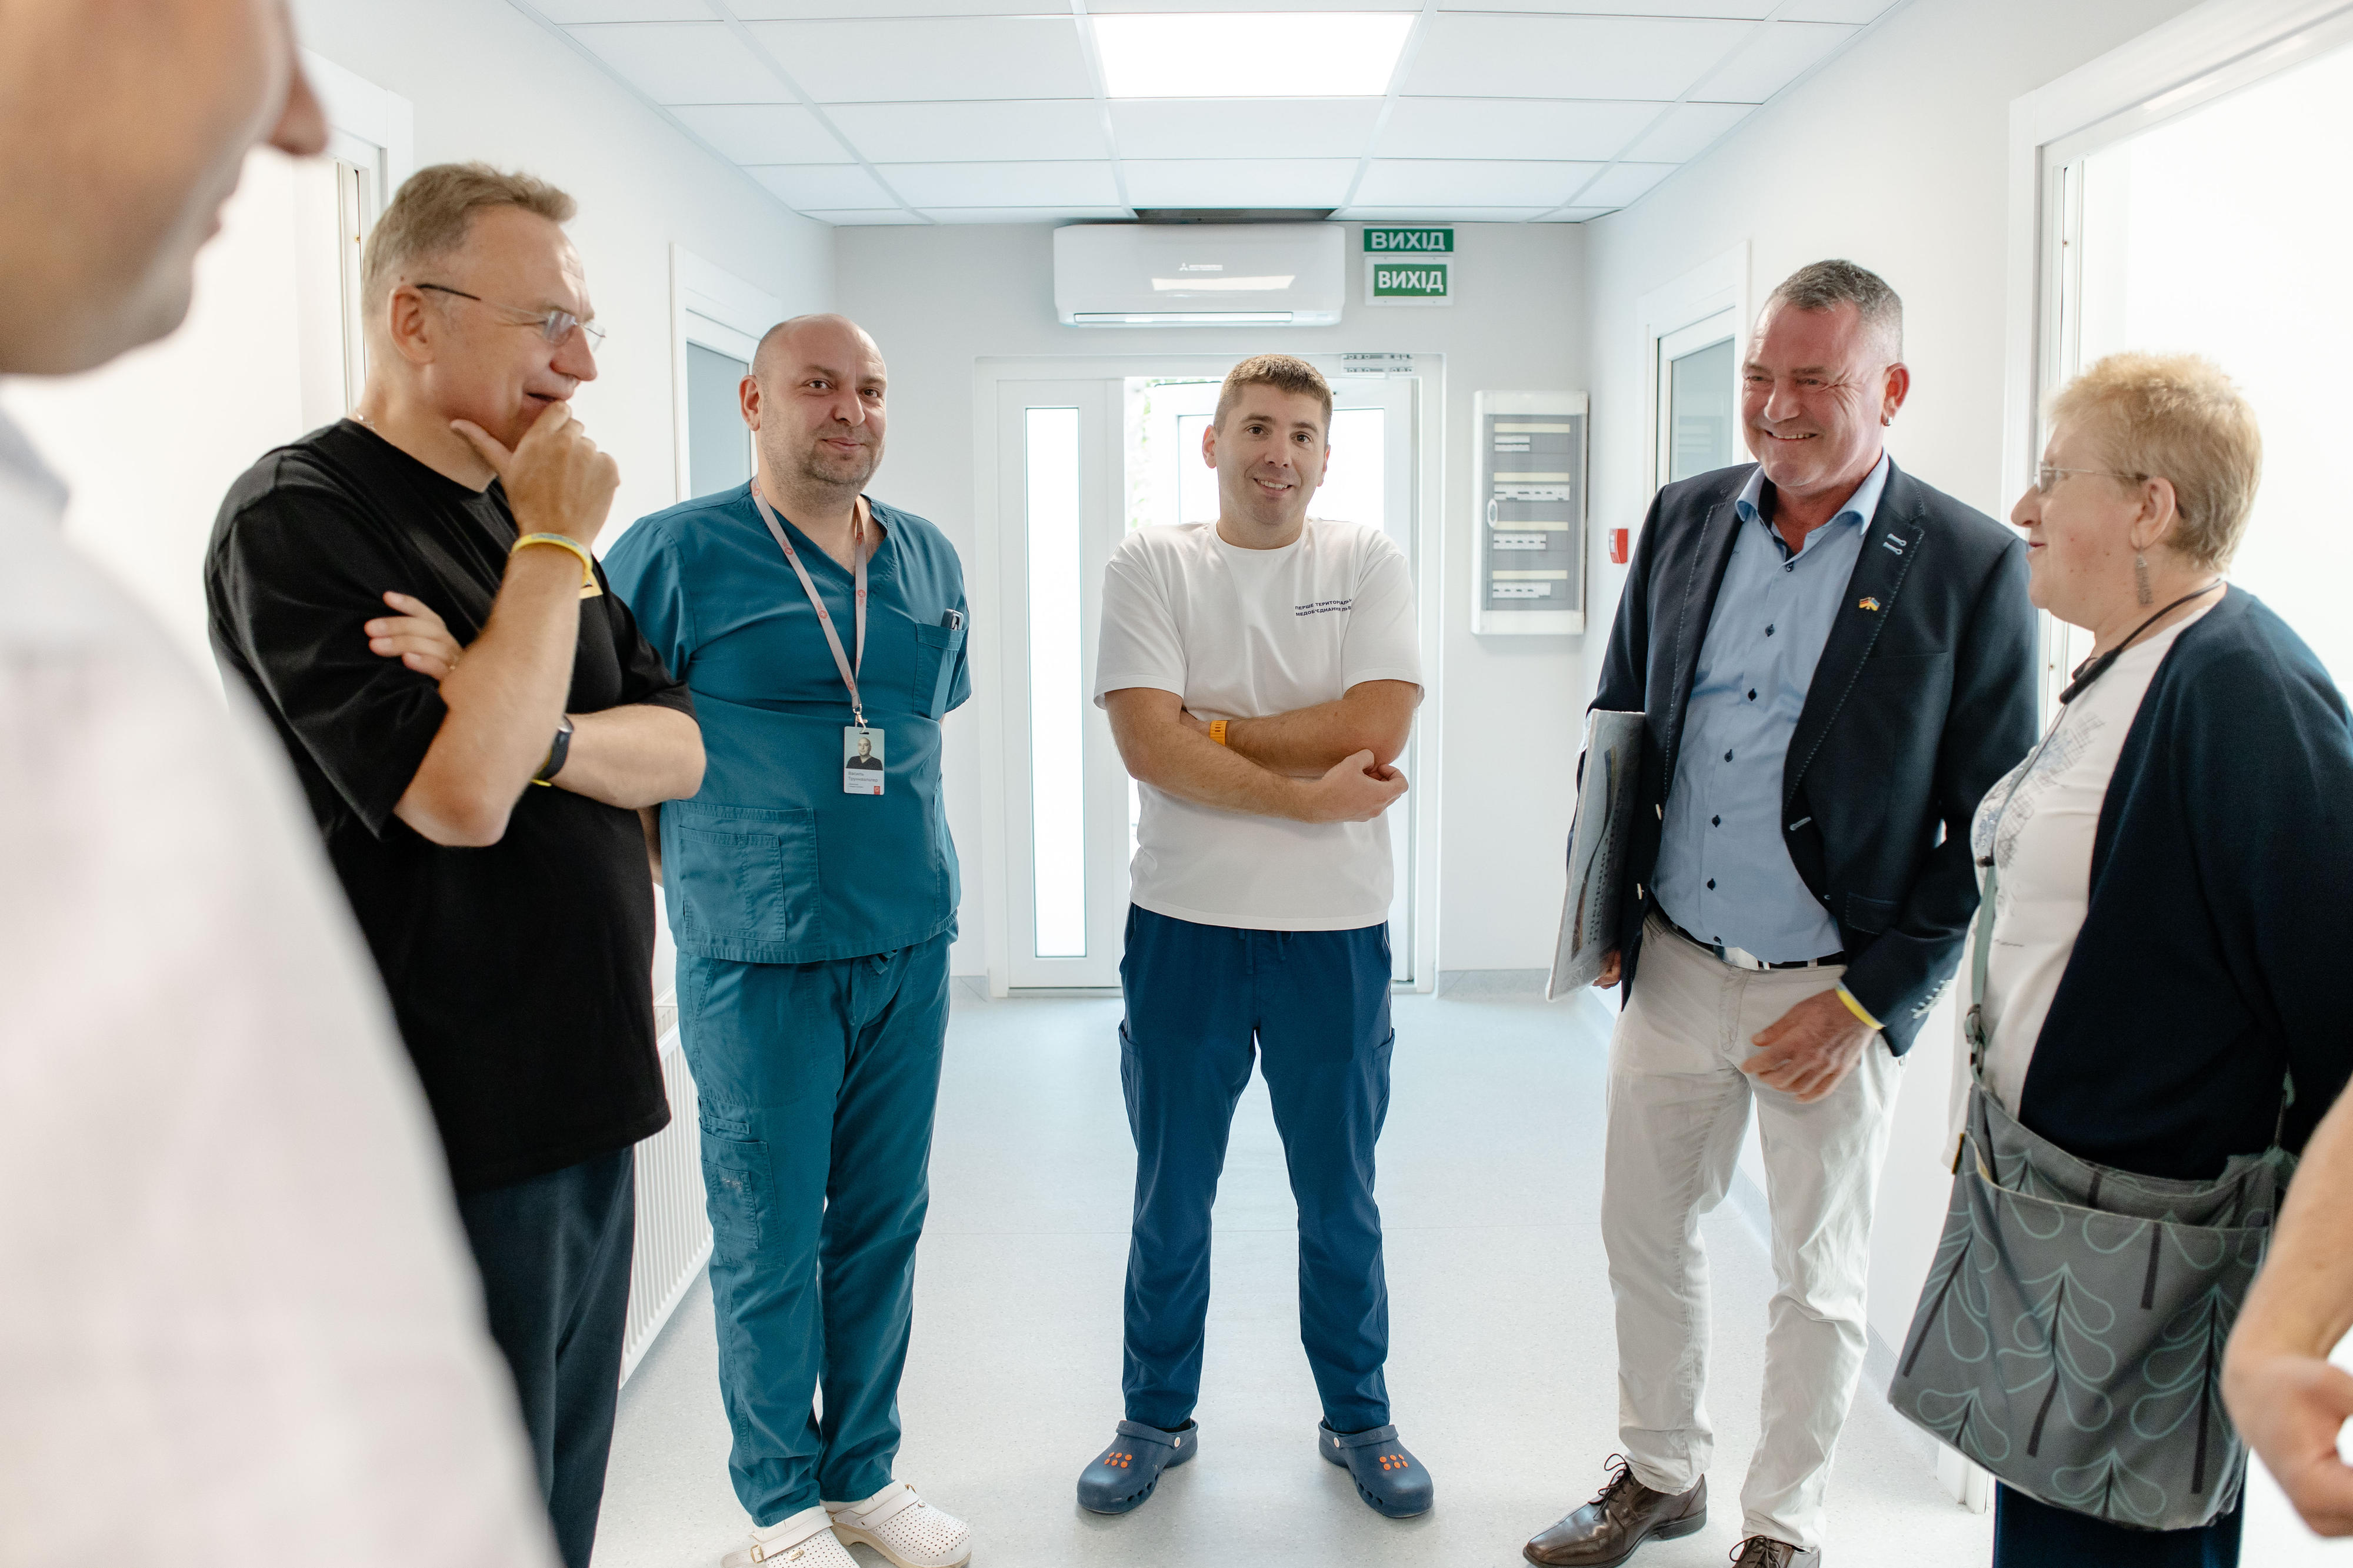 Clinic director V. guides visitors through the new modular diagnostics centre and the hospital extension in Lviv.